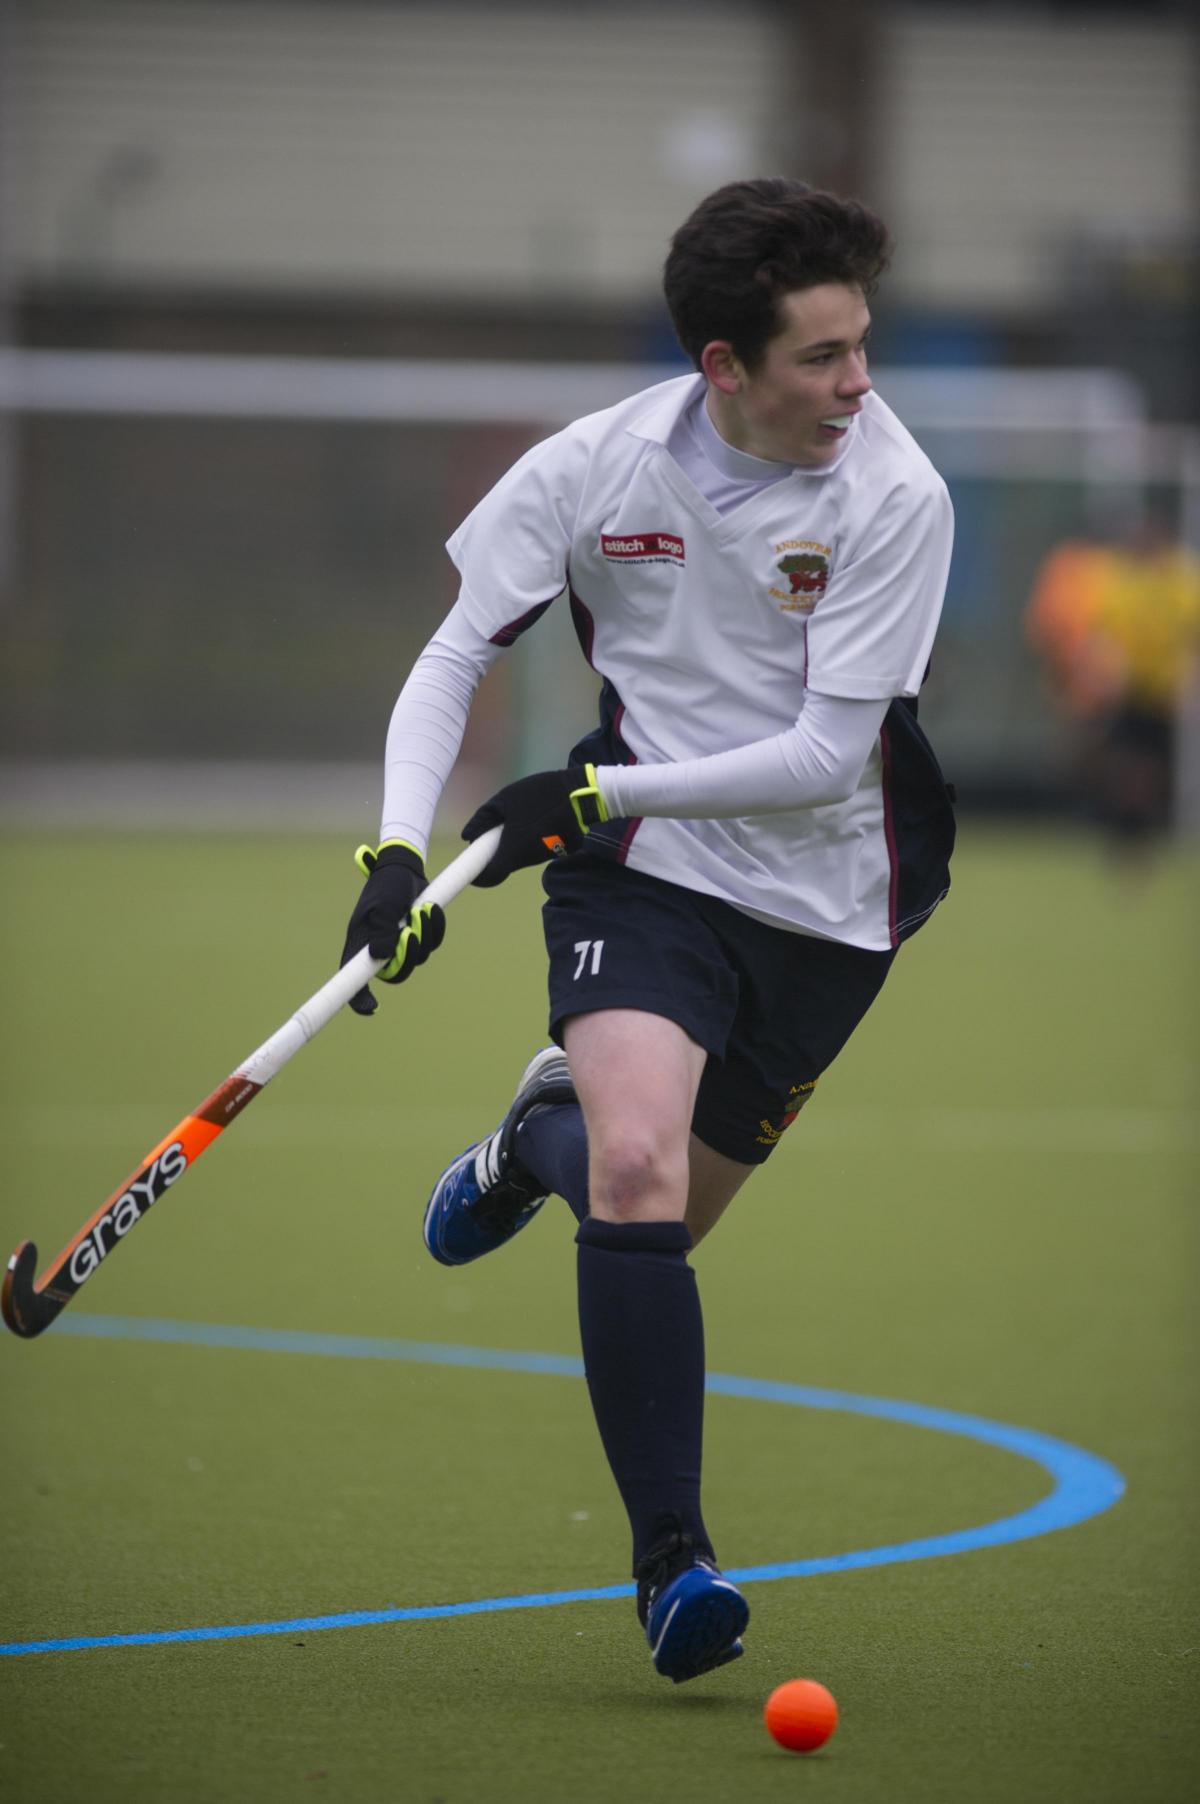 Andover Hockey Men’s Seconds v Bournemouth Seconds at John Hanson - Saturday 10 February - Picture by Dan Murphy